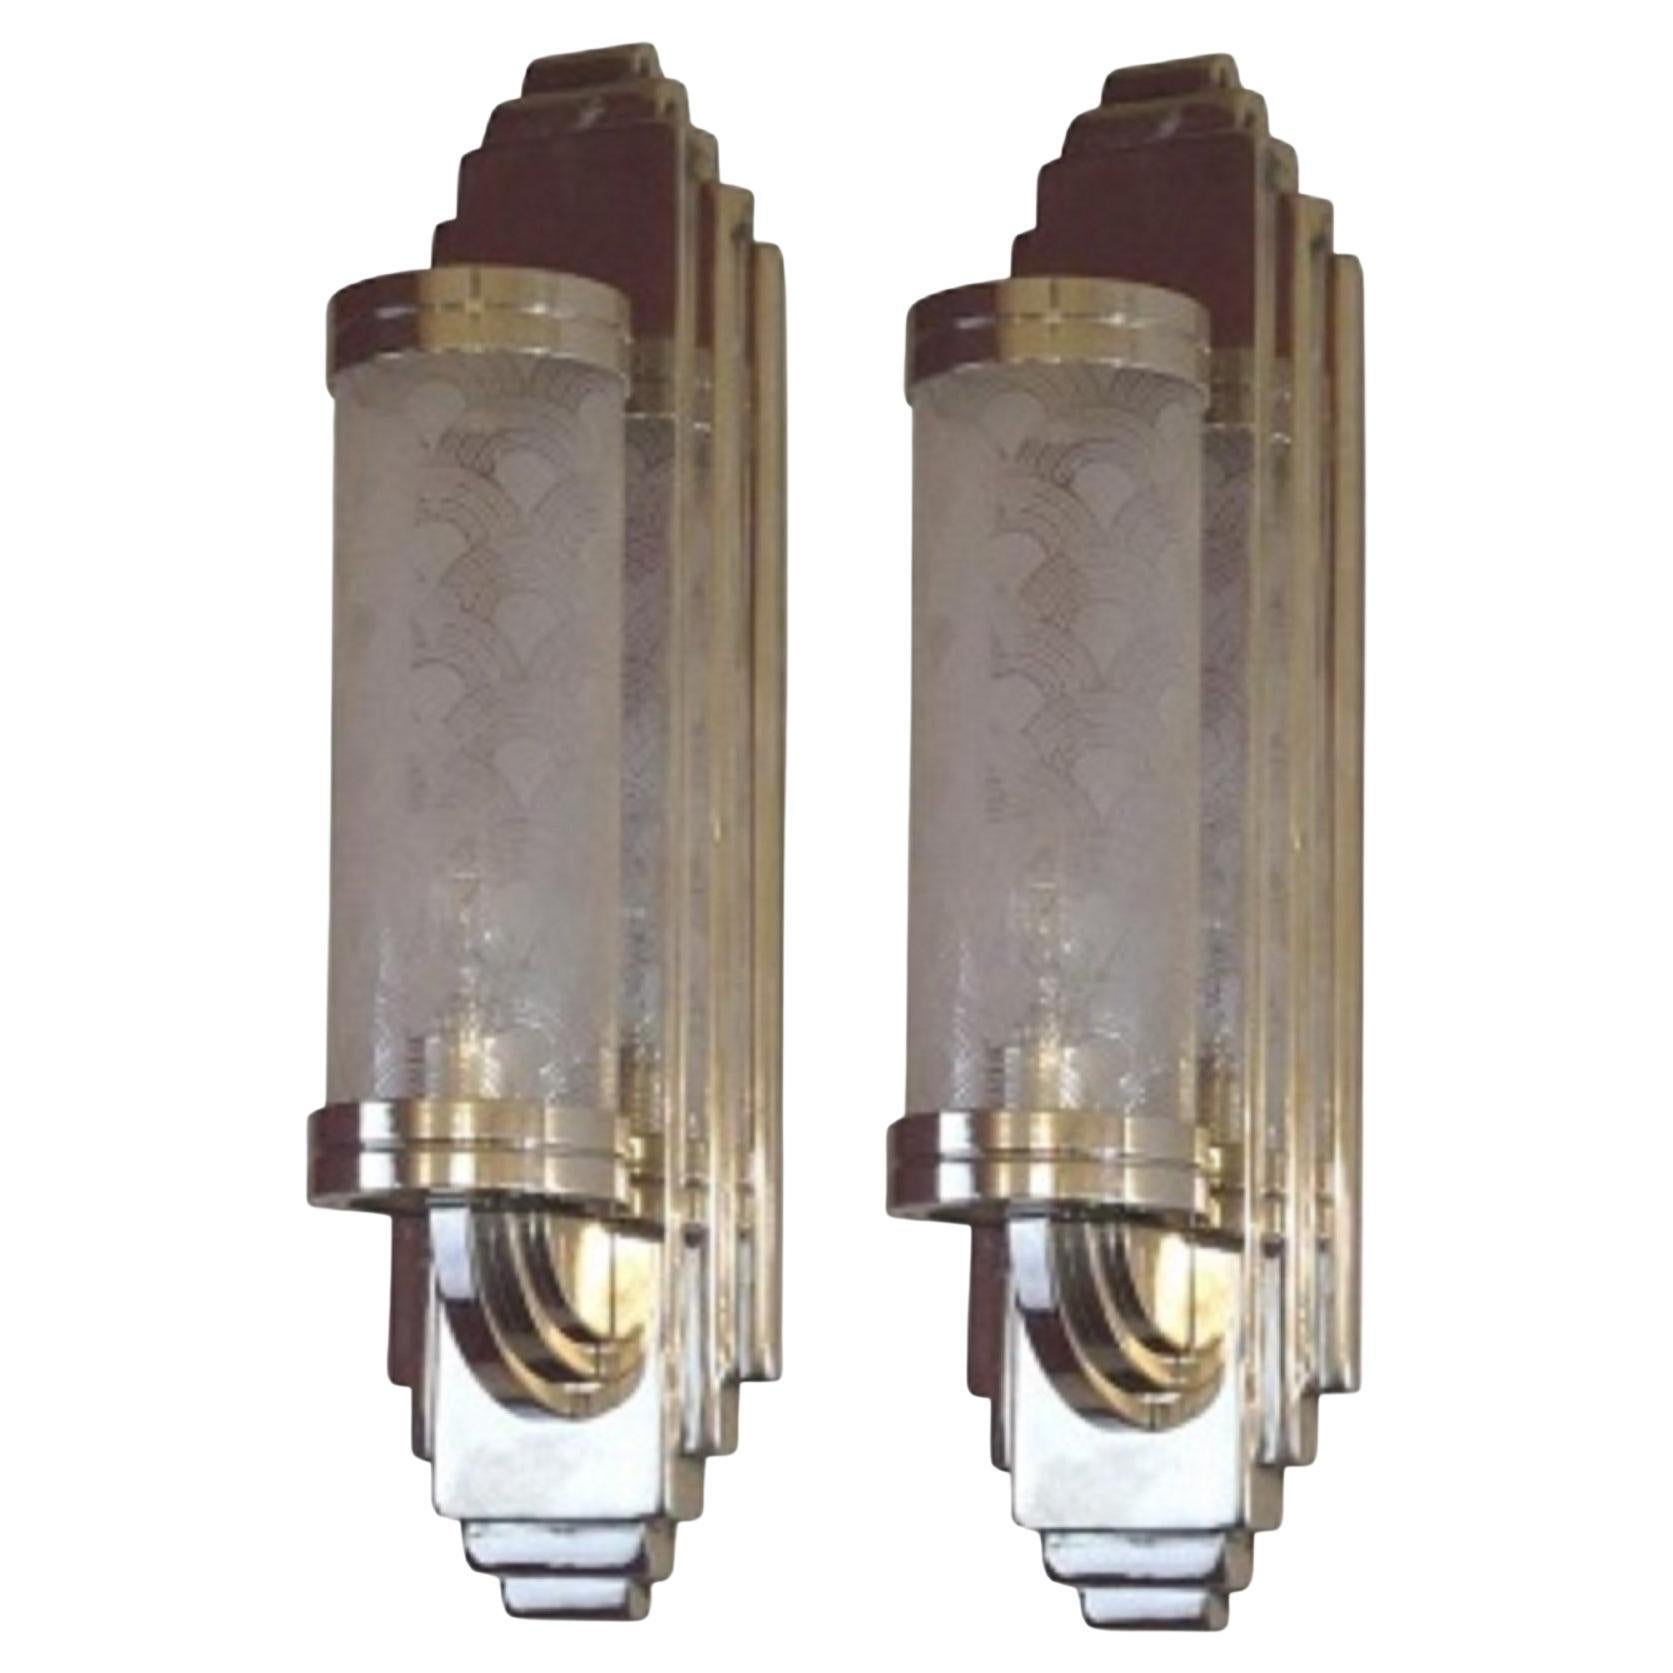 2 Sconces in Chrome and Glass, Style, Art Deco, Year, 1930, German